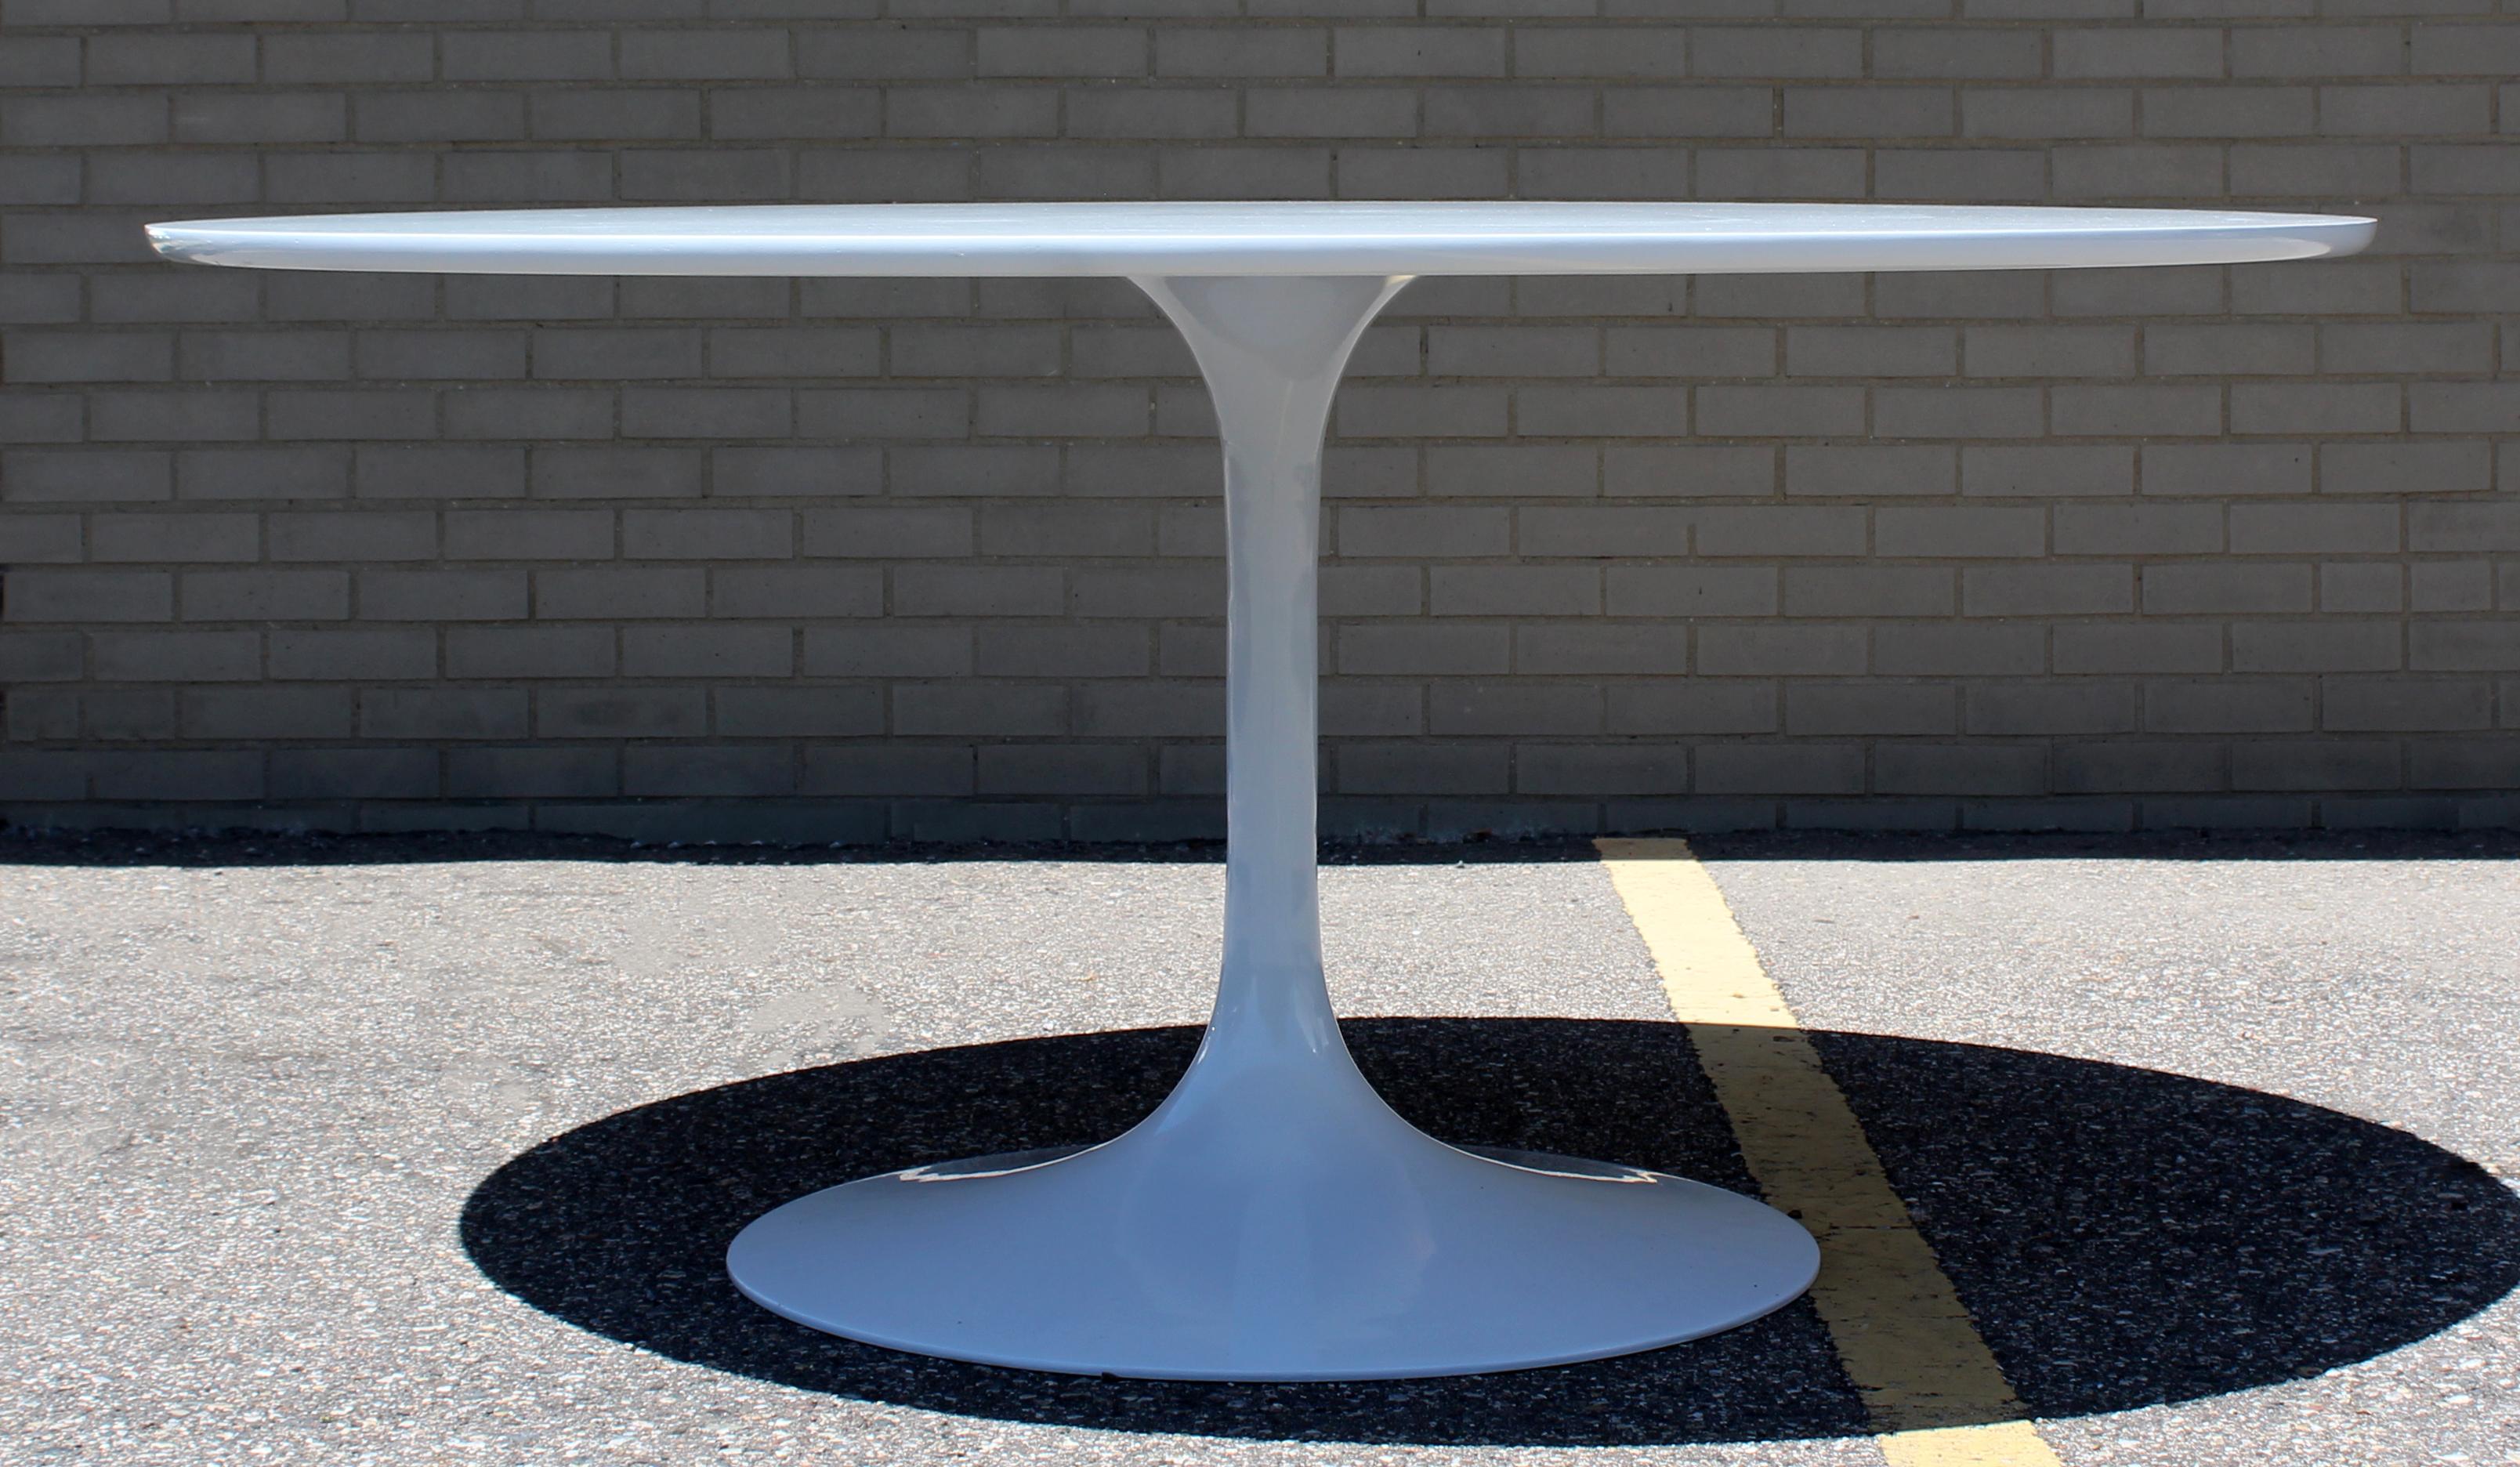 For your consideration is an Eero Saarinen style, round, Tulip dining table, by Burke, circa 1960s. In excellent condition. The dimensions are 60